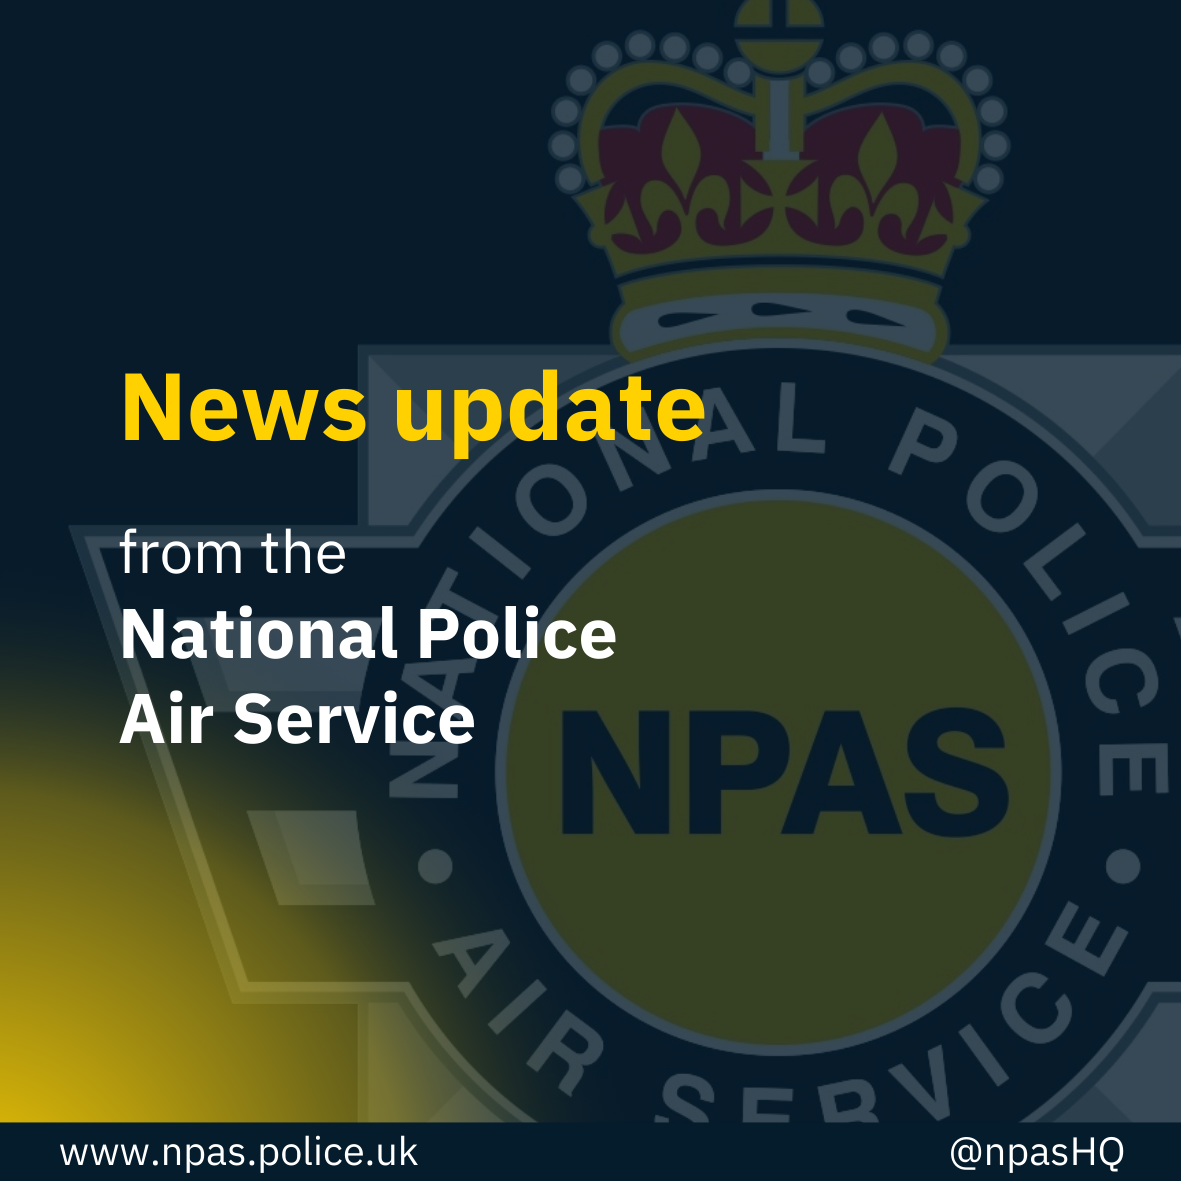 NPAS logo and words 'News update from the National Police Air Service'